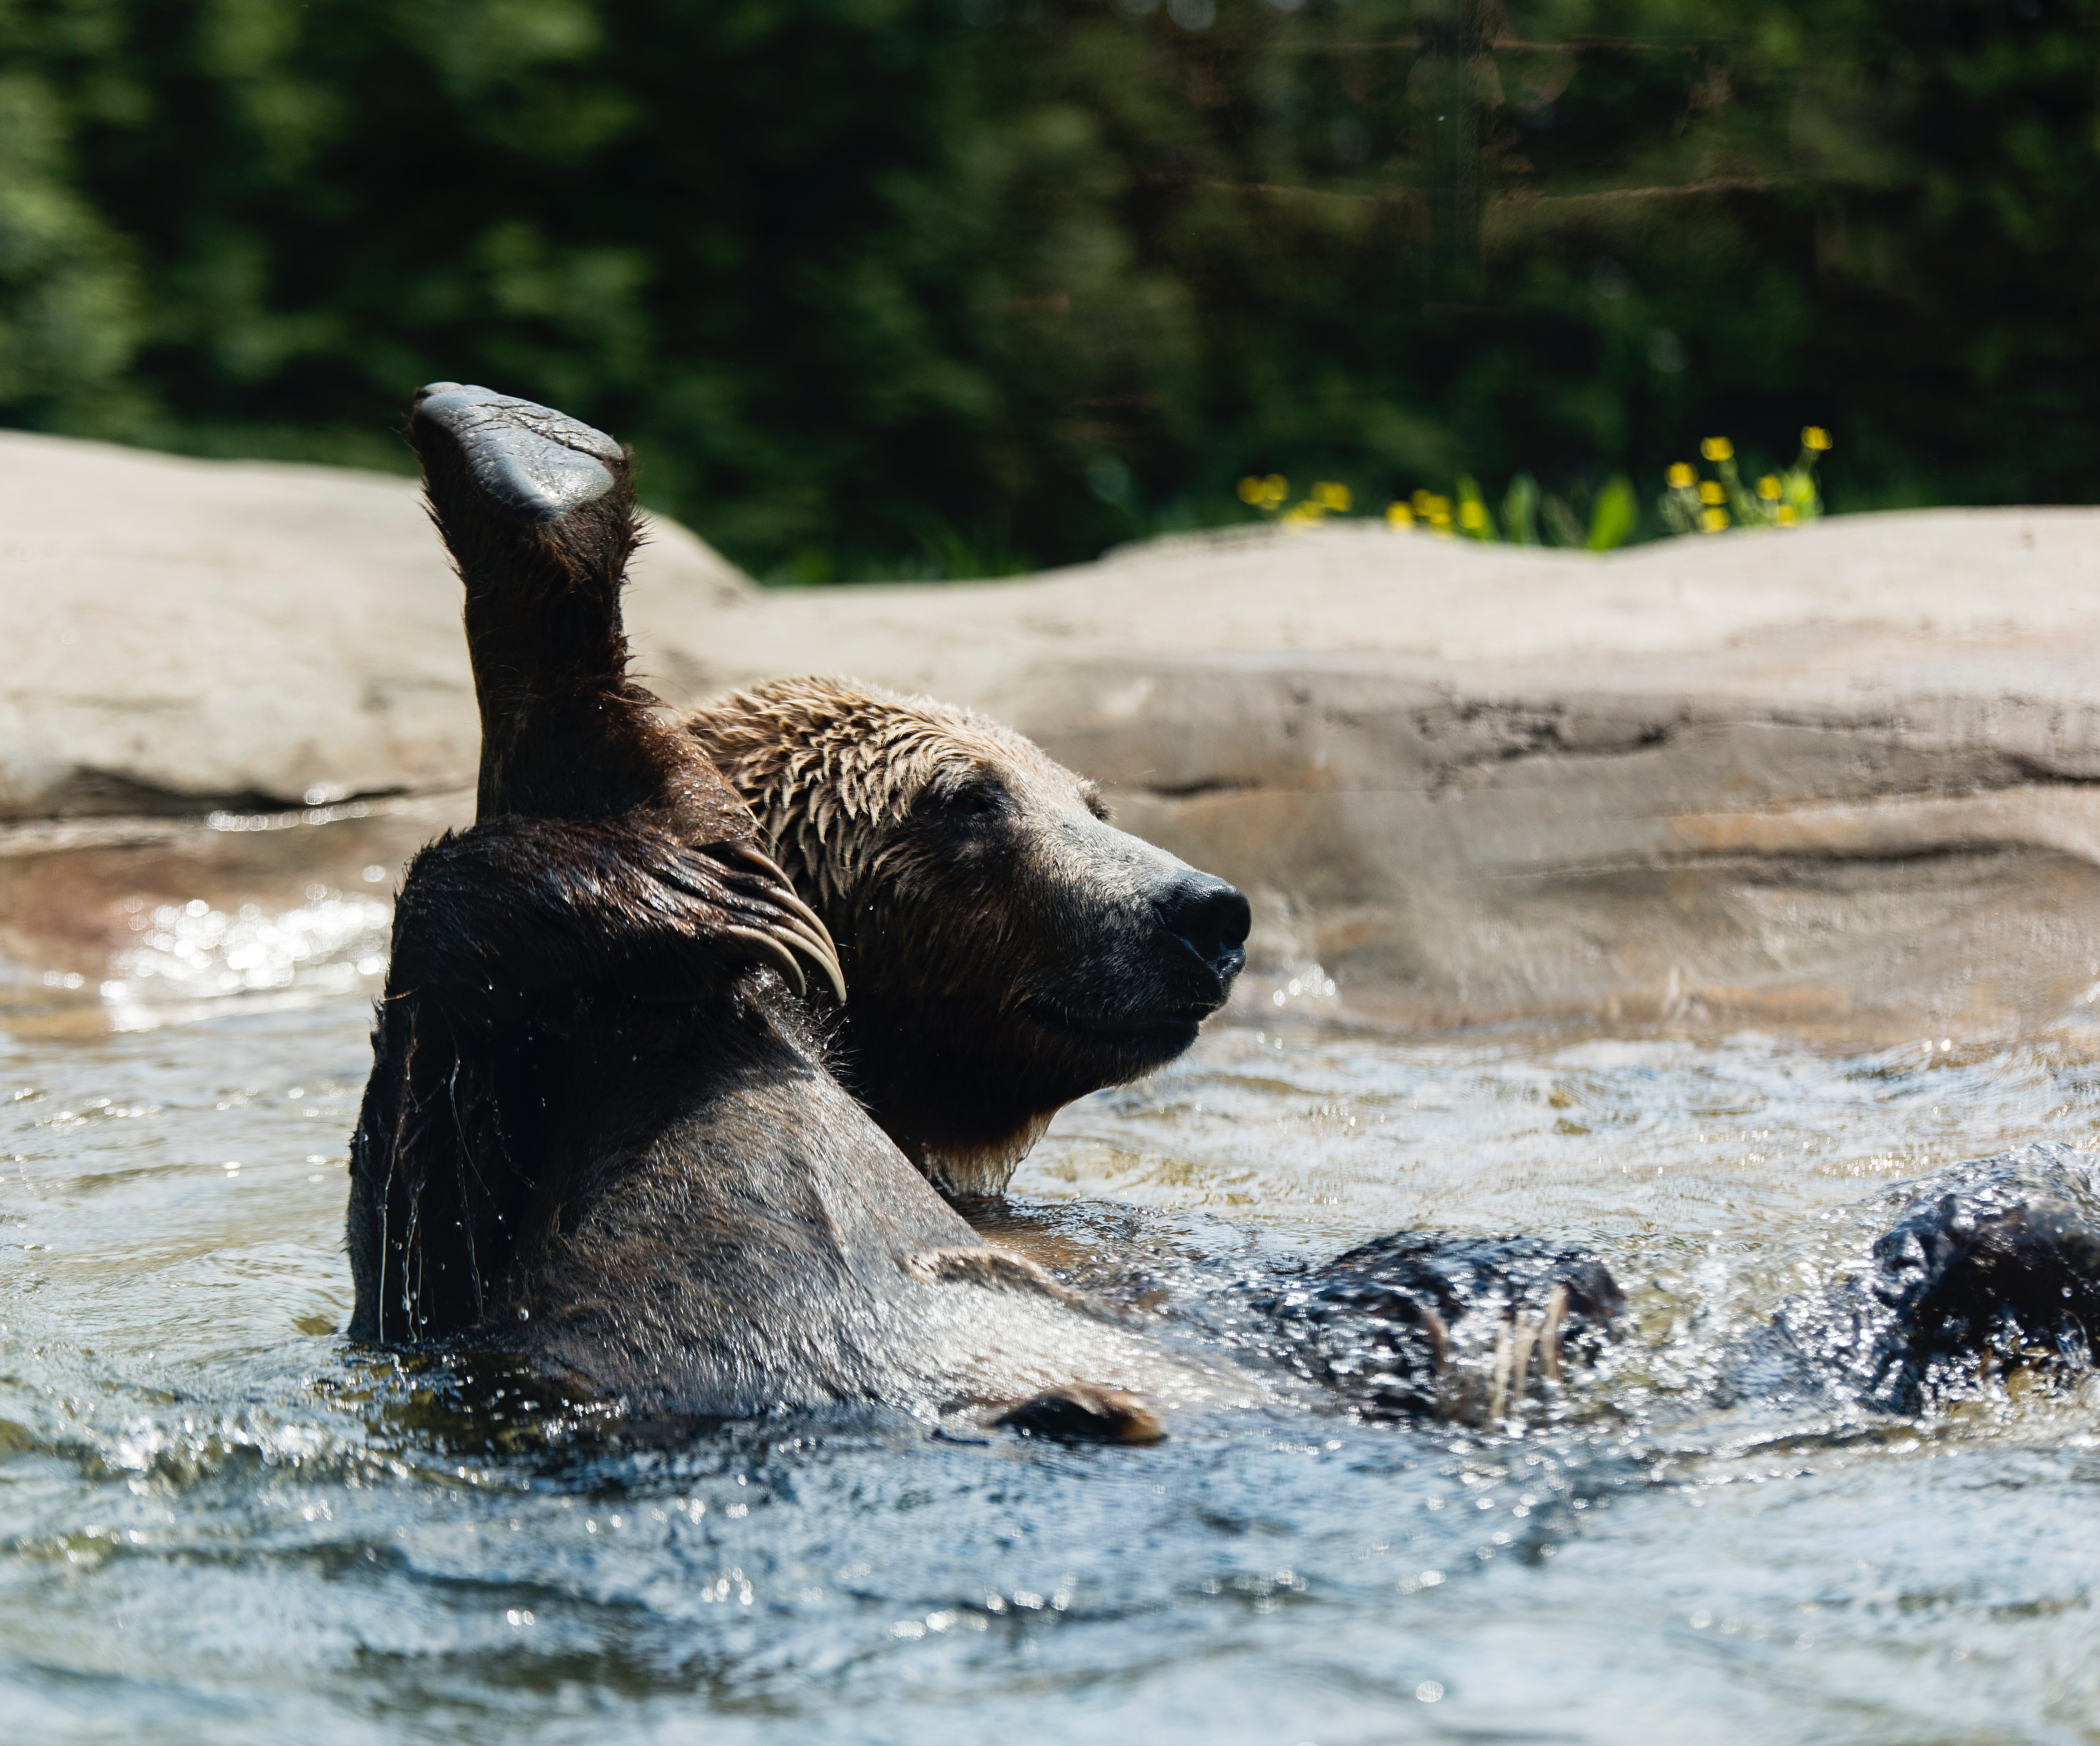 Grizzly bear playing in water